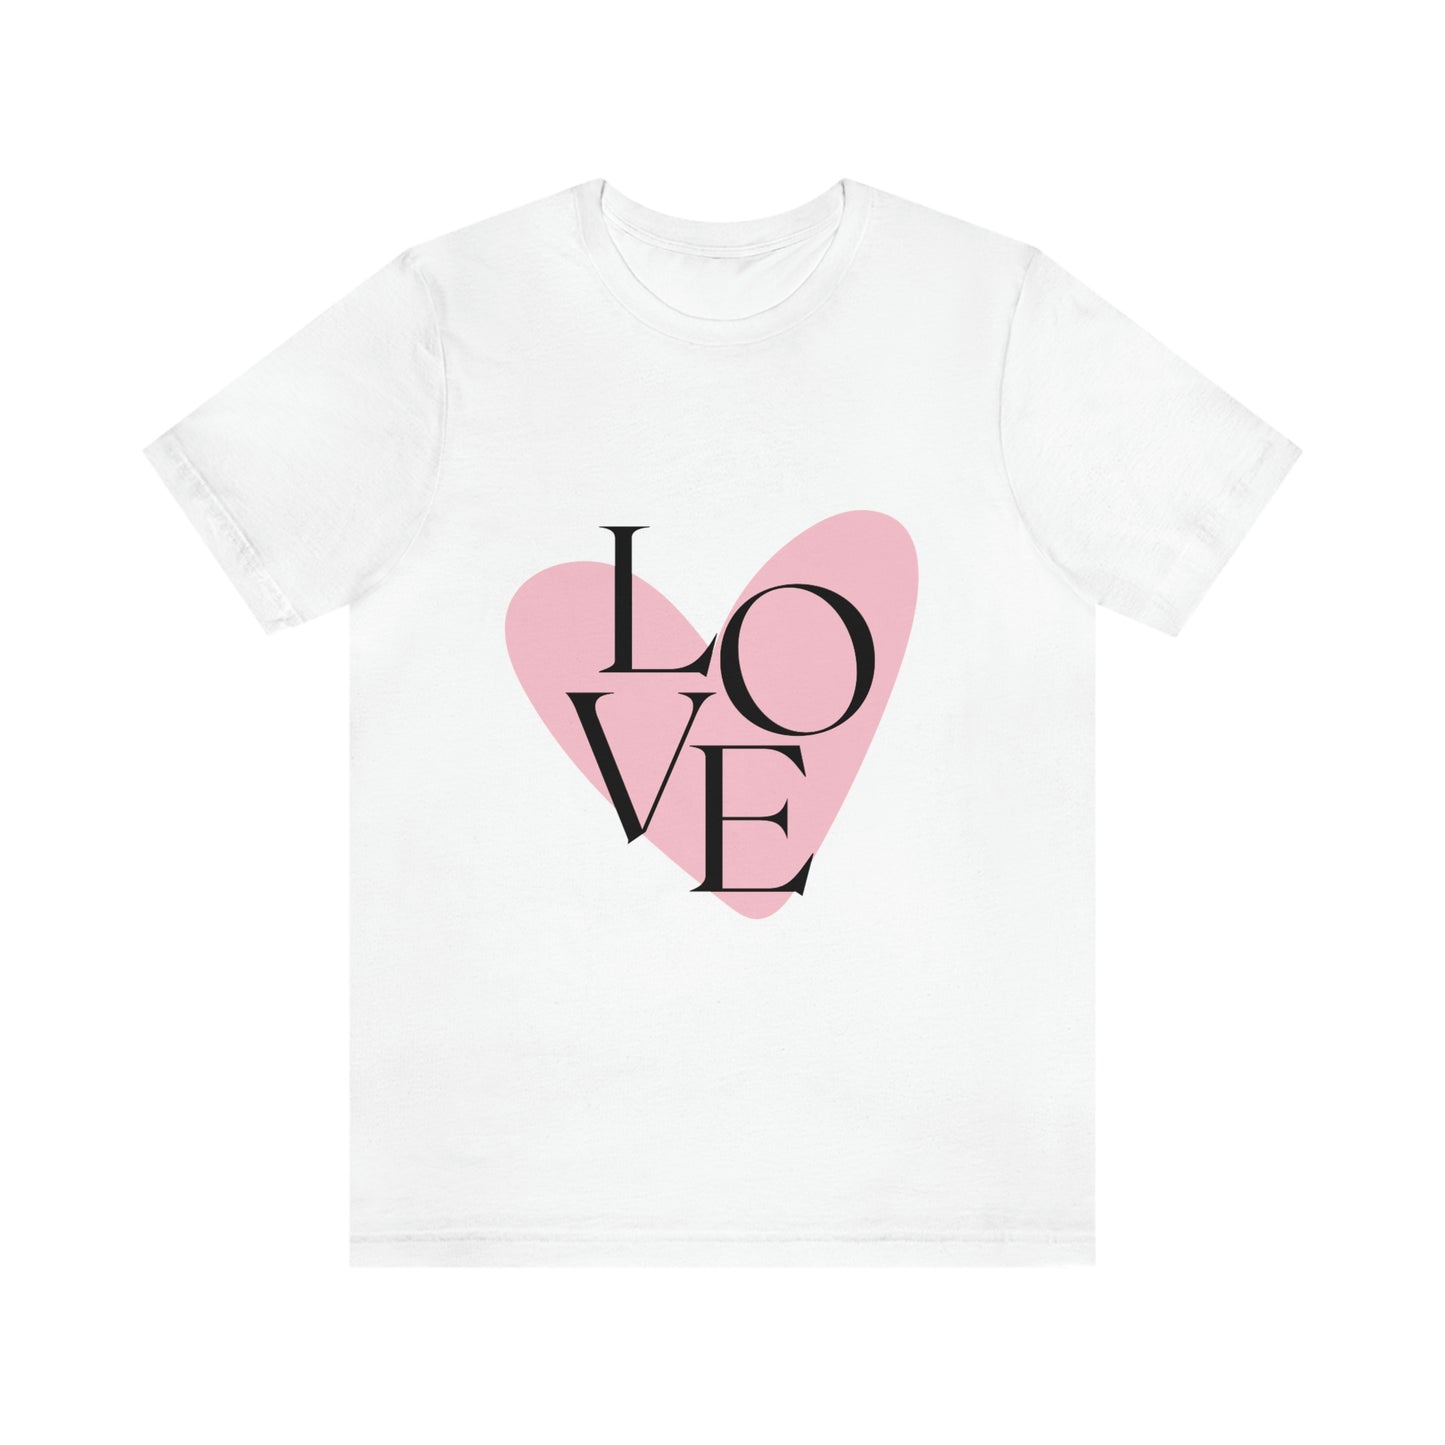 Valentine's T-Shirt reminiscent of the 70s. She will love this comfy fashionable Valentine's T-Shirt.